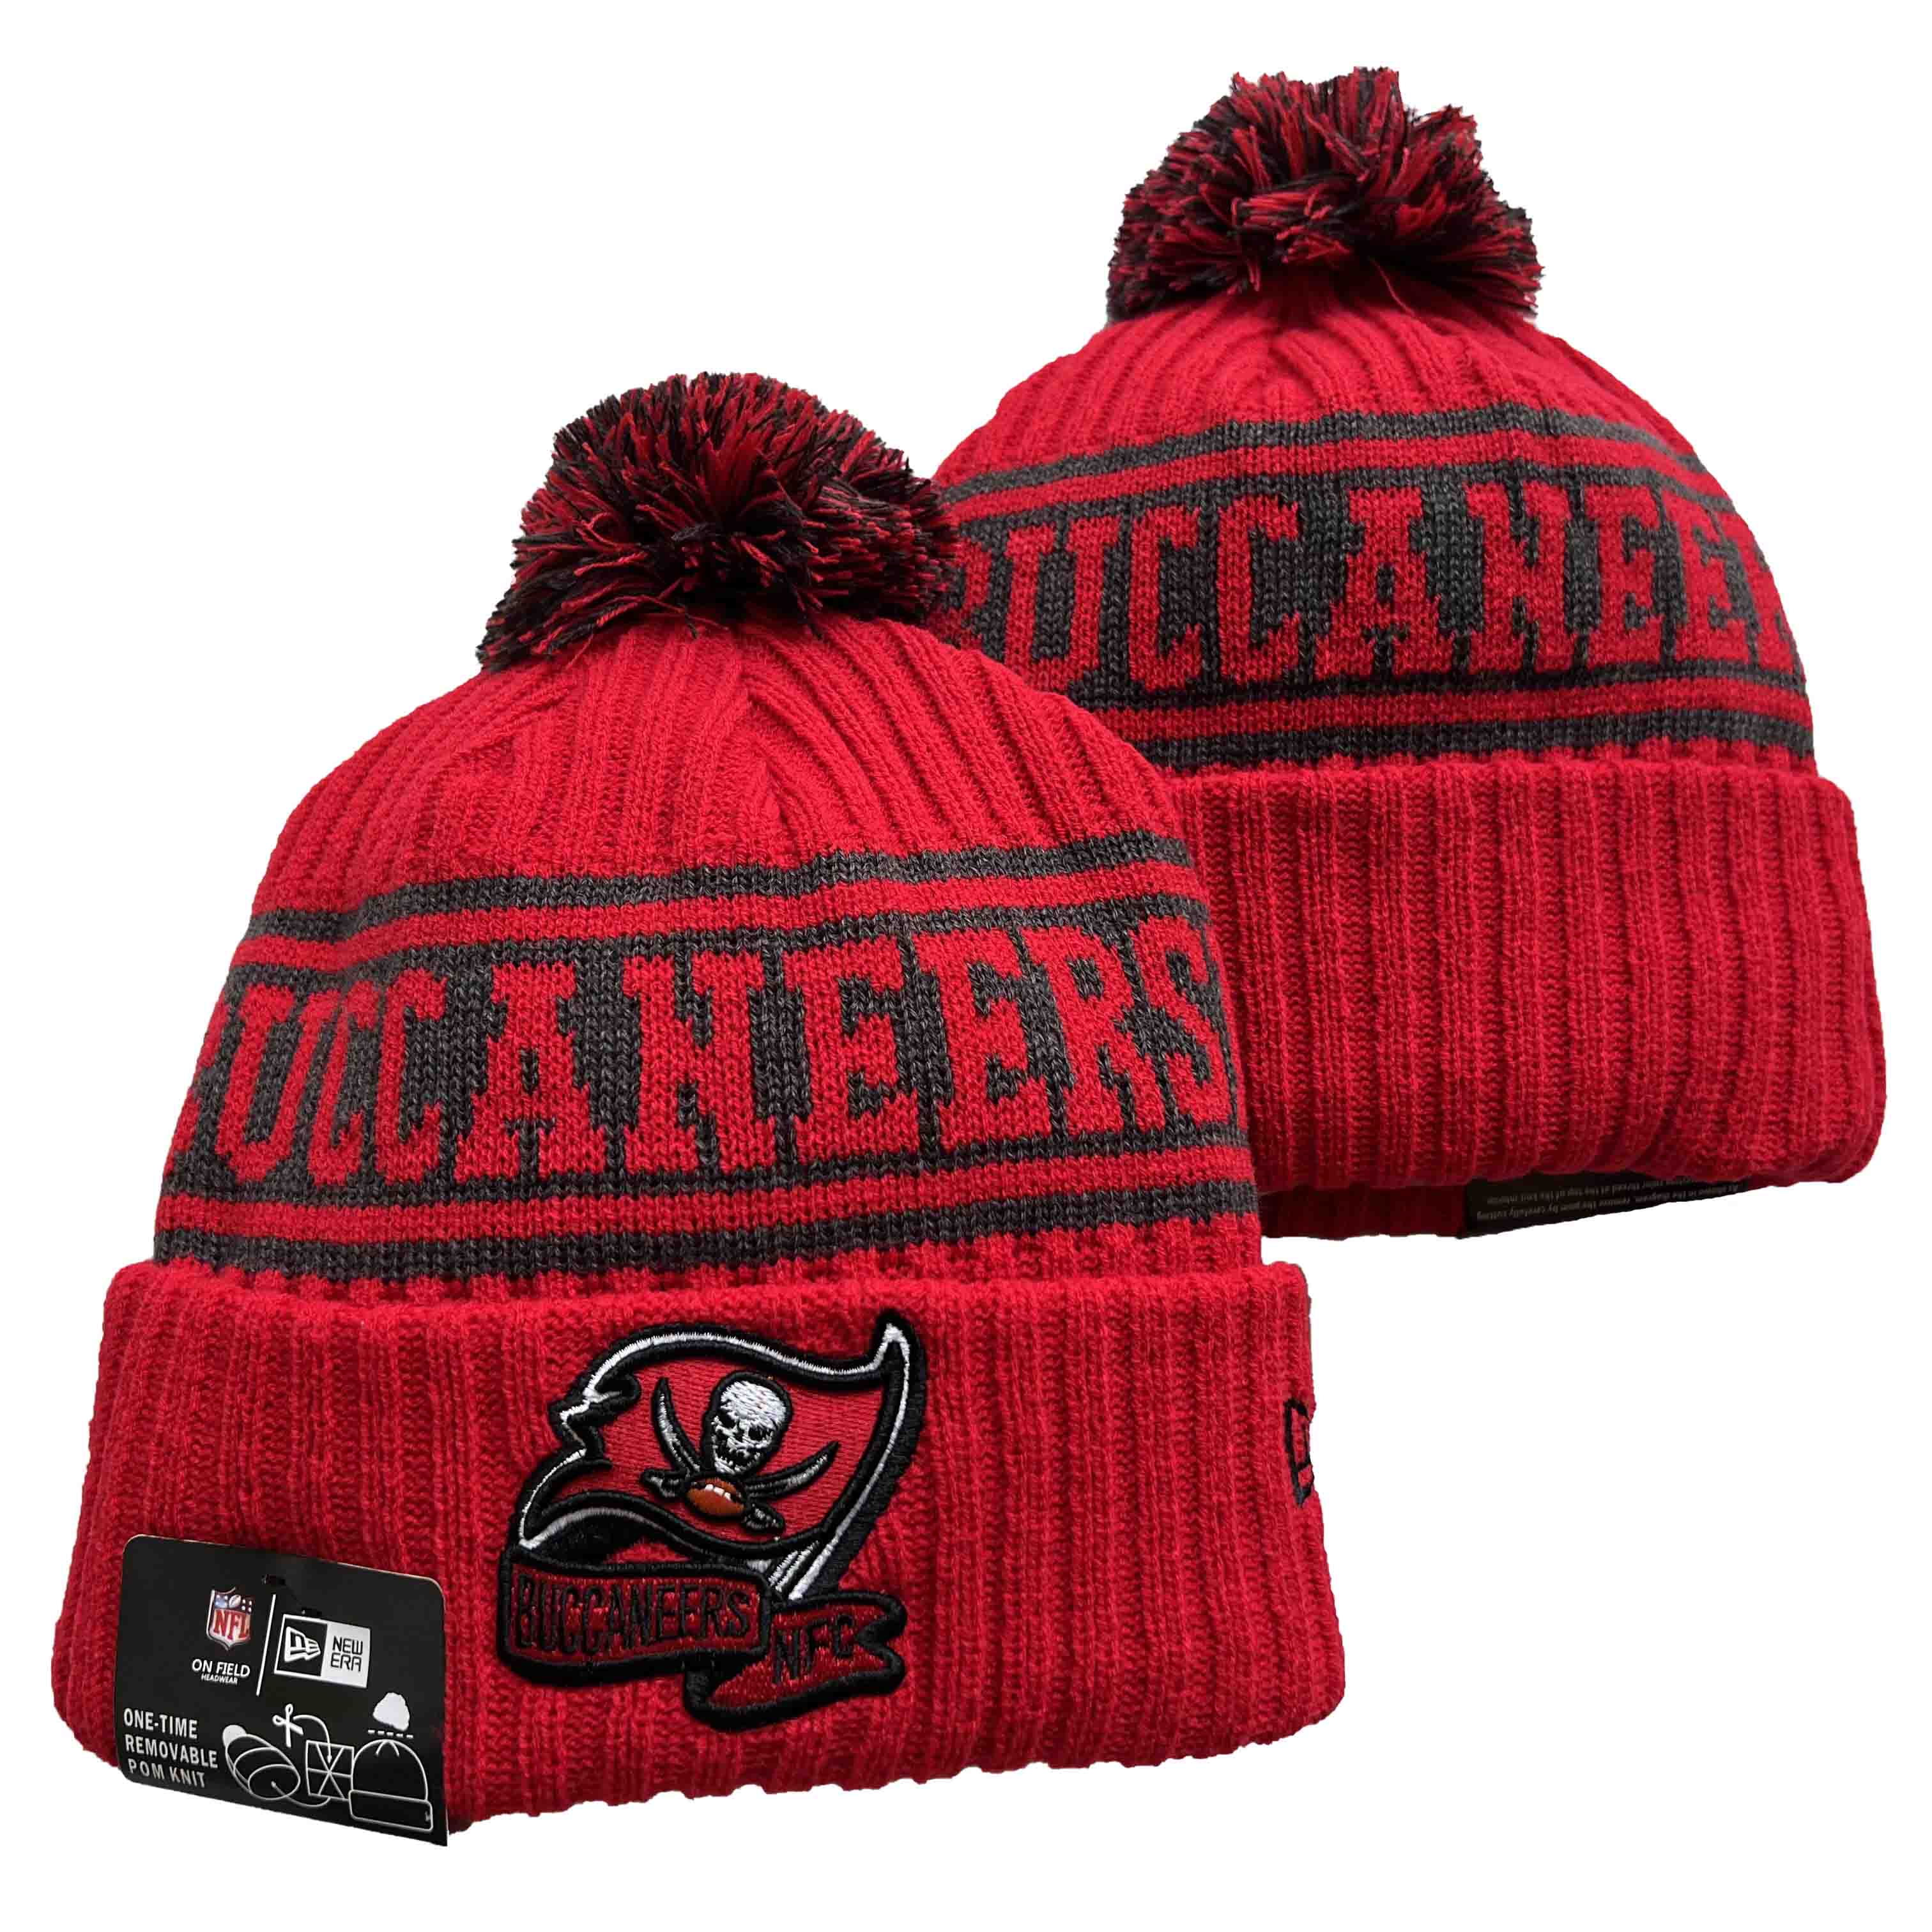 Tampa Bay Buccaneers Knit Hats 098